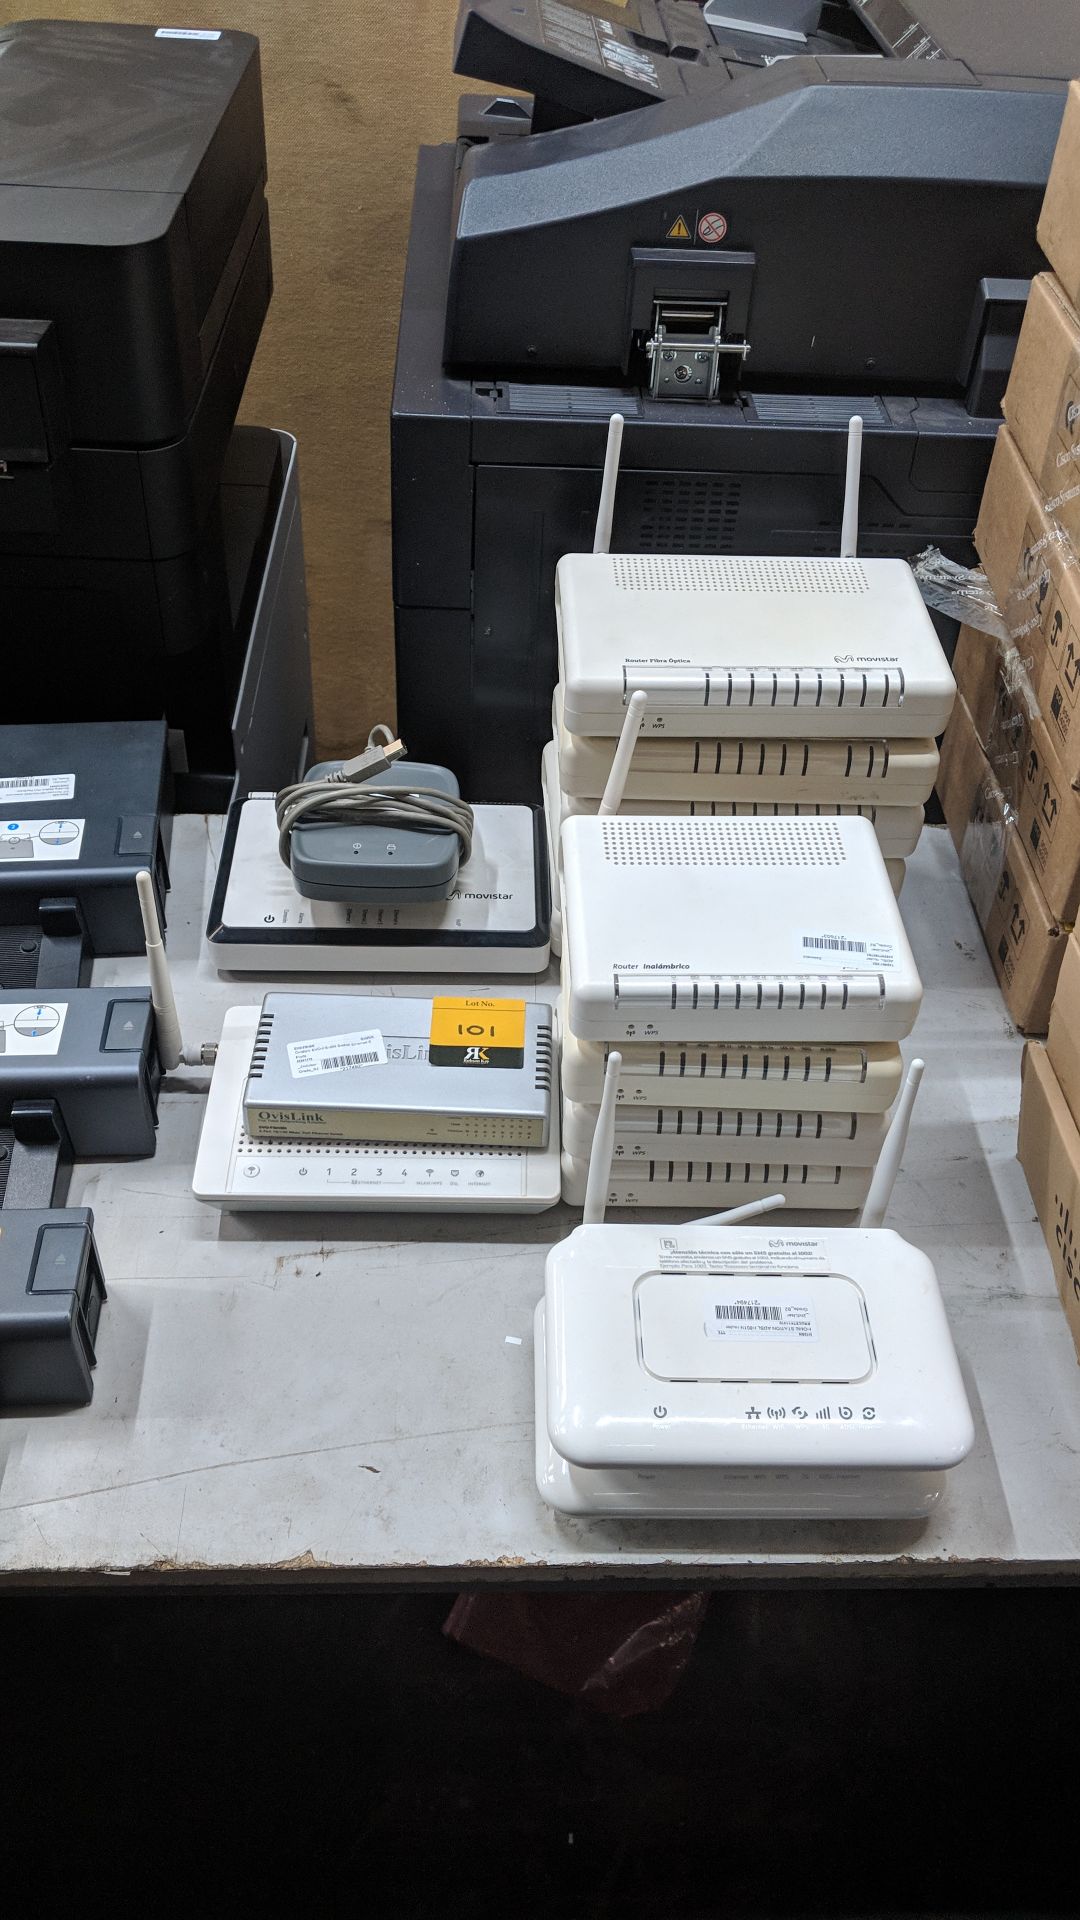 15 off assorted wireless routers & similar IMPORTANT: Please remember goods successfully bid upon